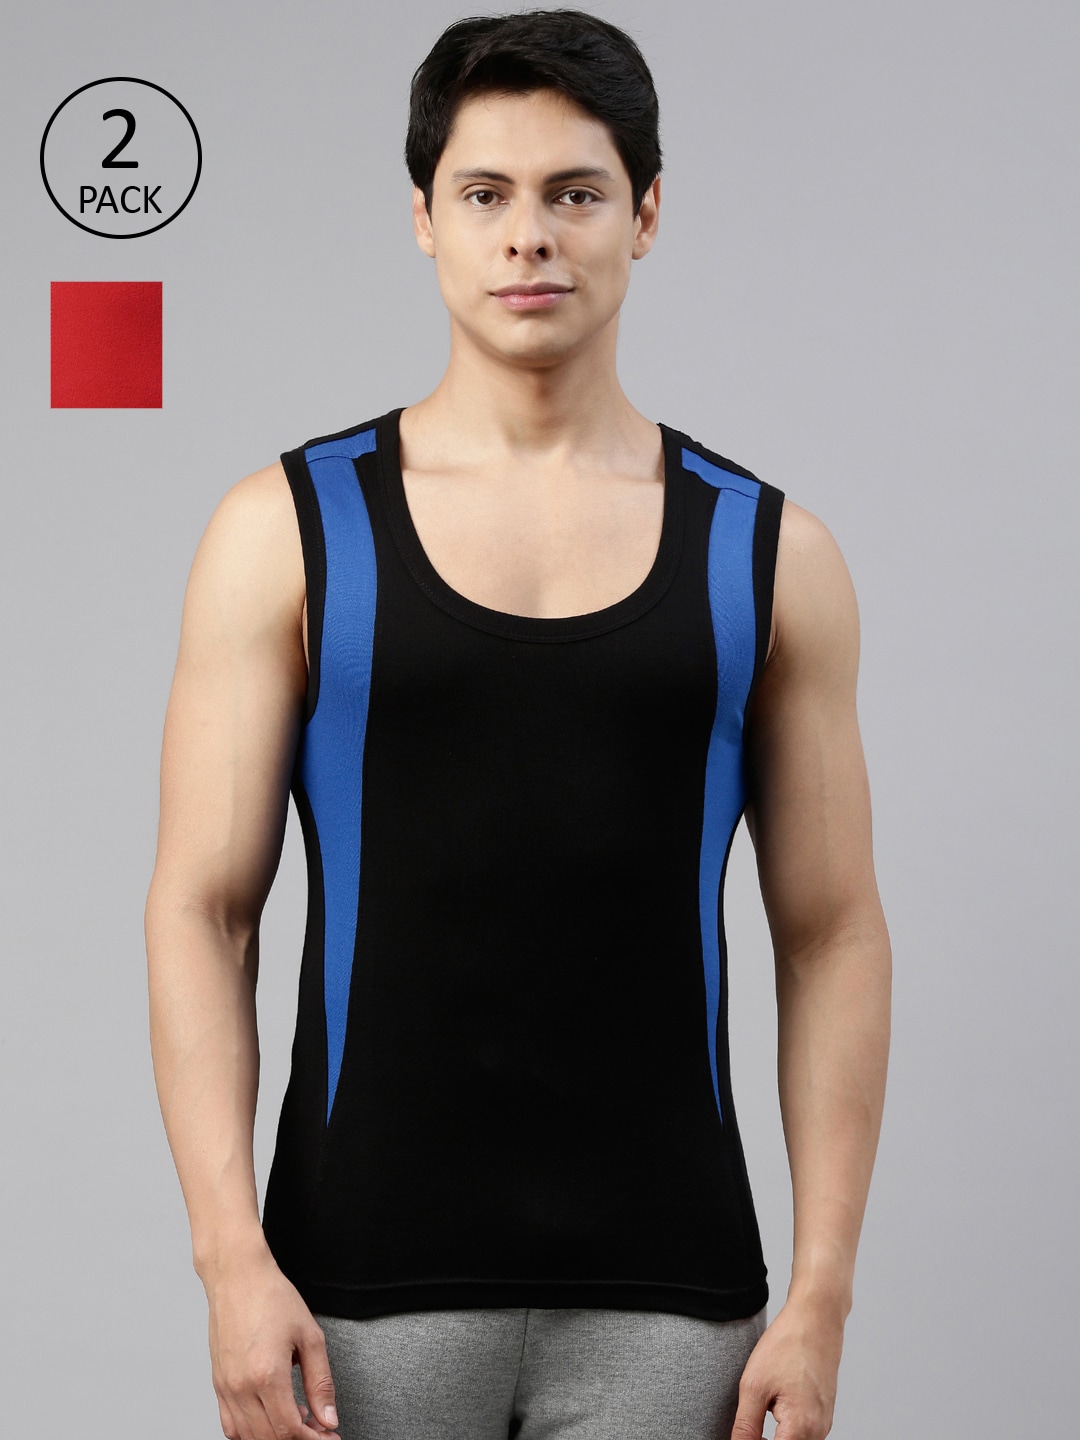 Clothing Innerwear Vests | DIXCY SCOTT Pack Of 2 Men Red & Black Solid Pure Cotton Innerwear Gym Vests - HO42114